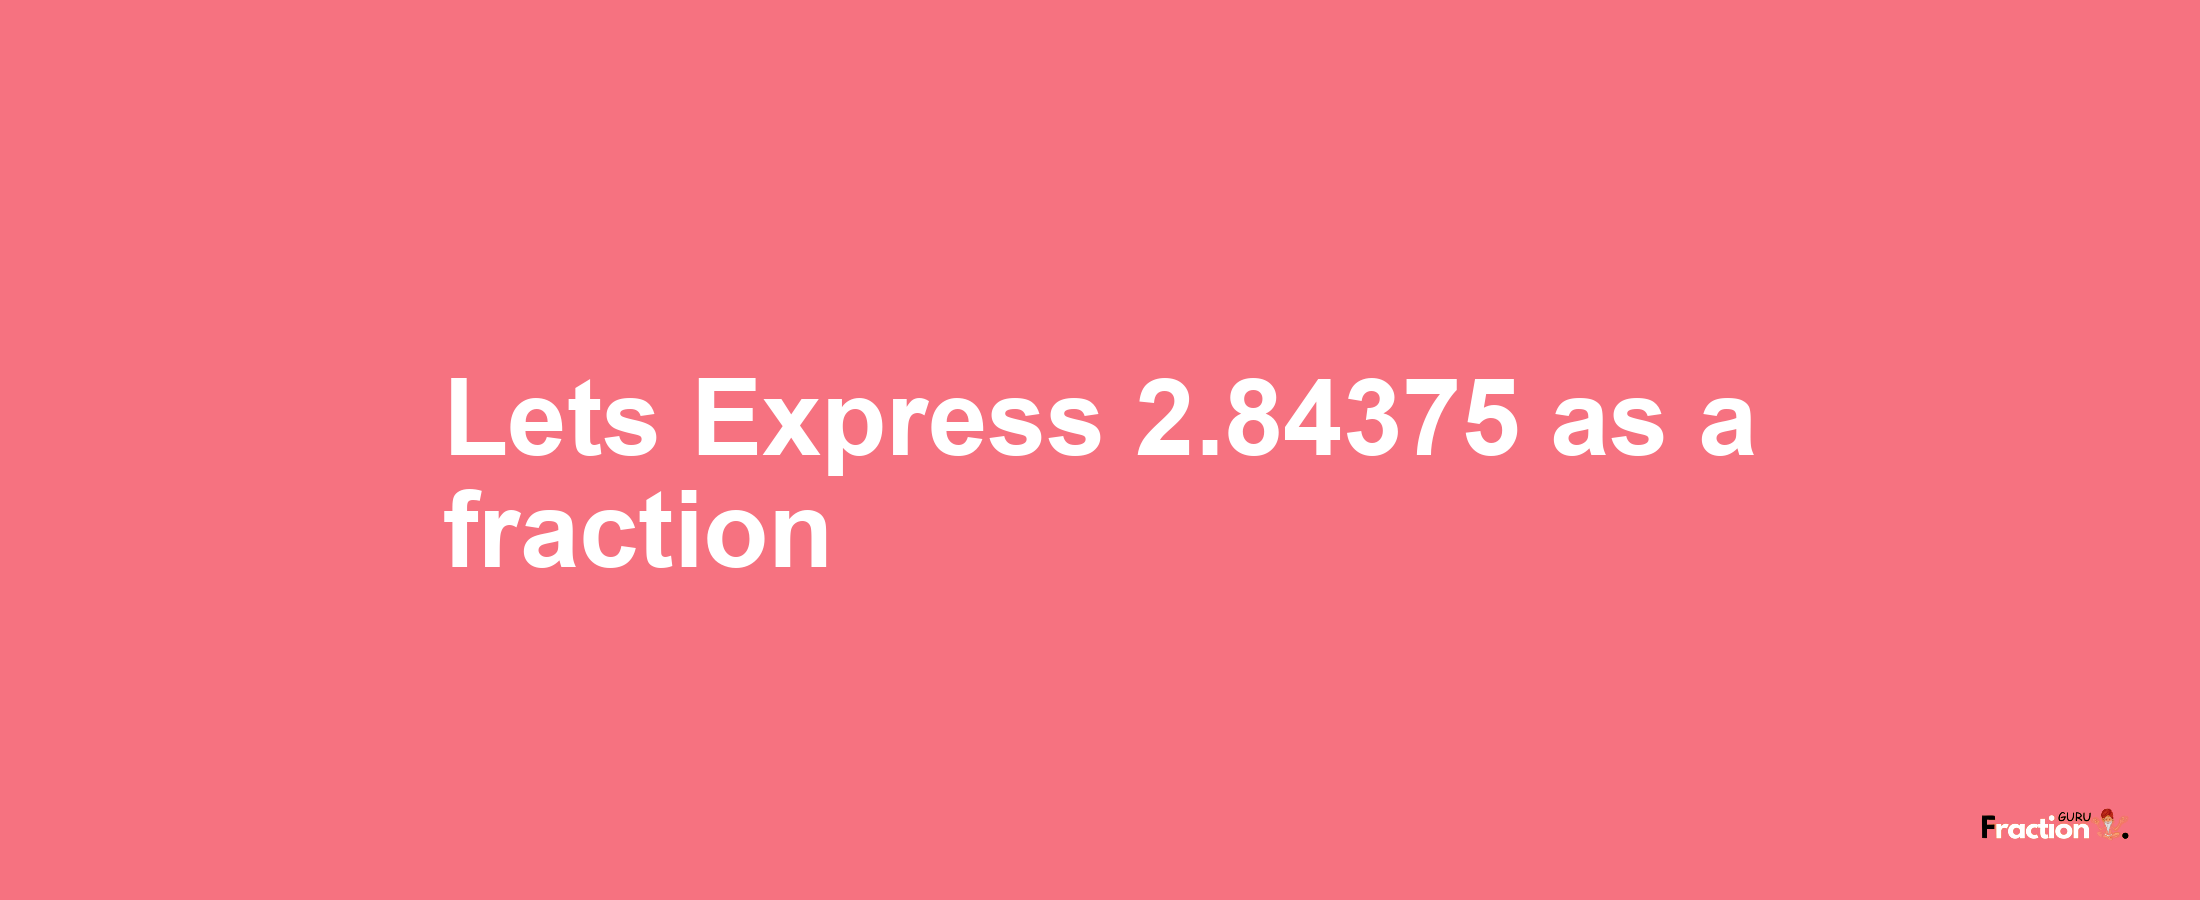 Lets Express 2.84375 as afraction